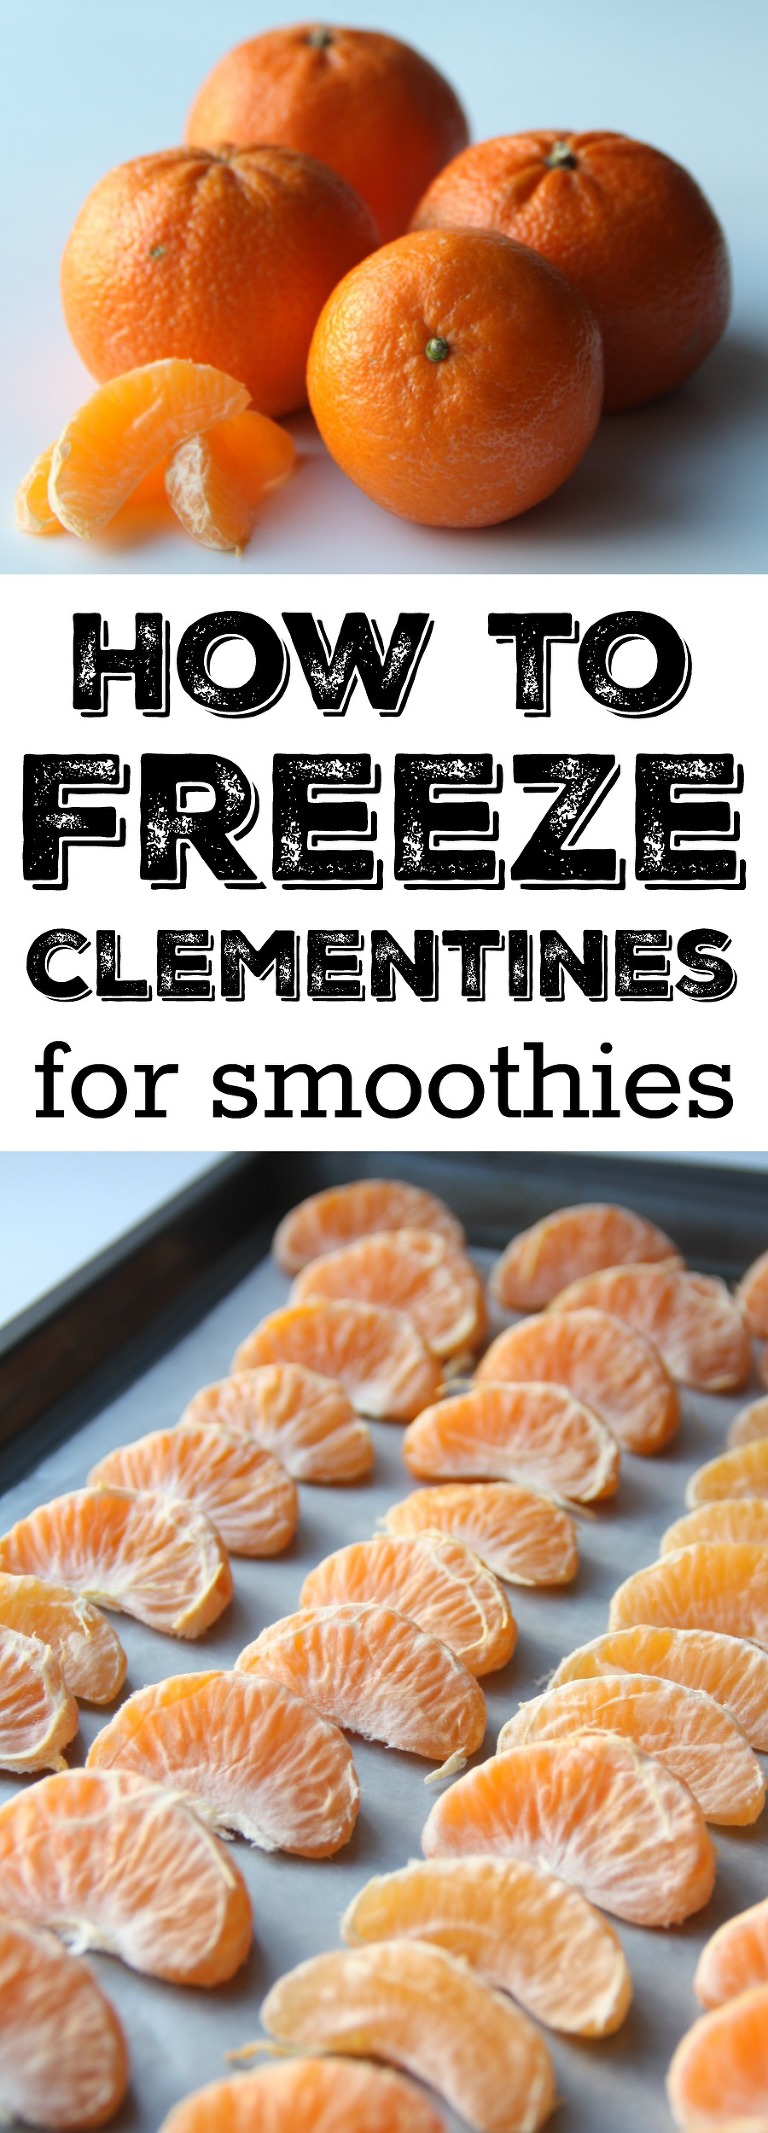 How to freeze clementines for smoothies